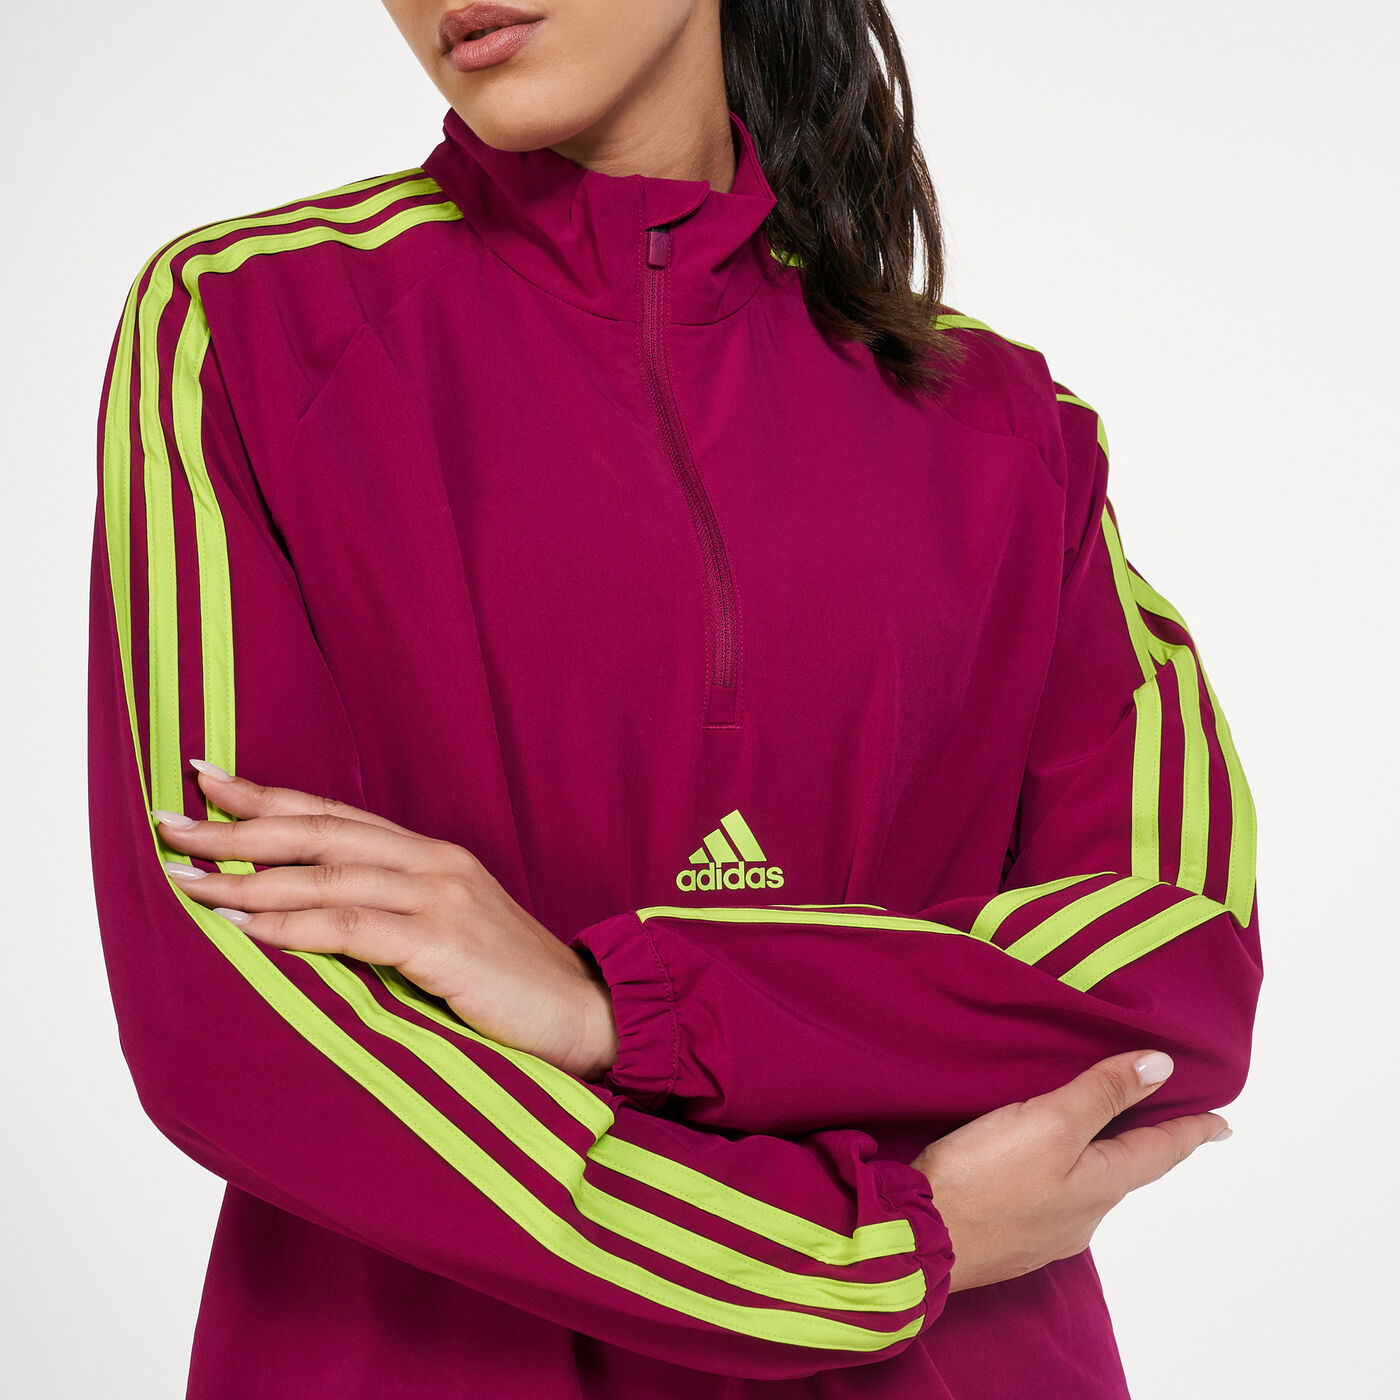 Women's 3-Stripes Cover-Up Jacket